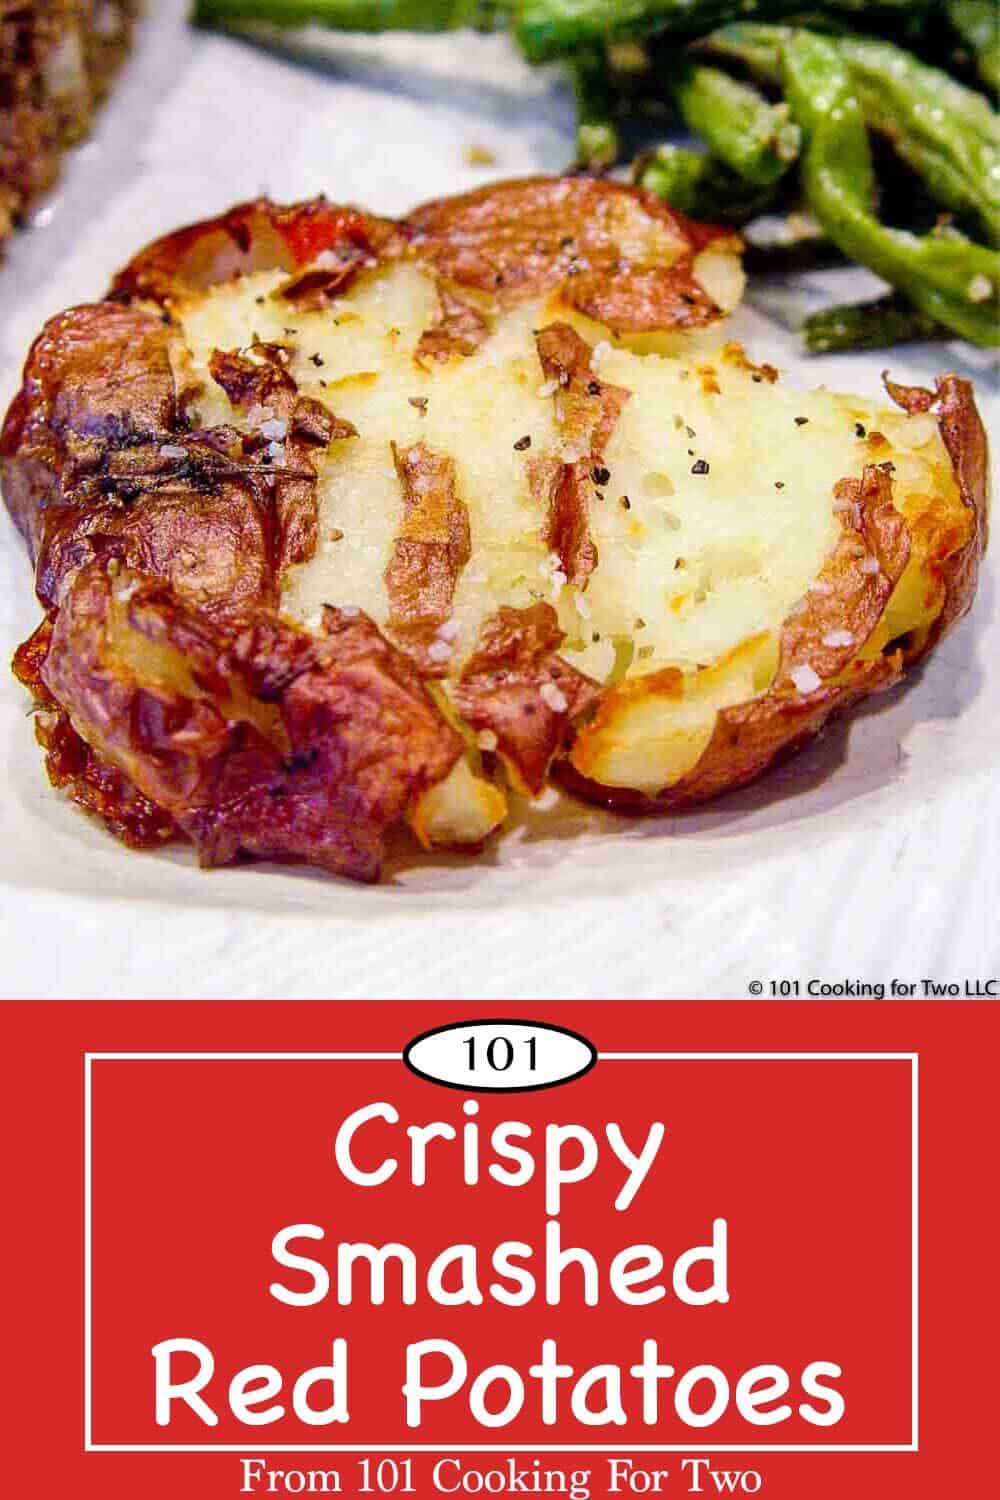 A great side dish for everyday or special meals. If you can boil water, you can do this. Just follow these easy step by step photo instructions. #CrispySmashedPotatoes #SmashedRedPotatoes #SmashedPotatoes #EasySmashedPotatoes